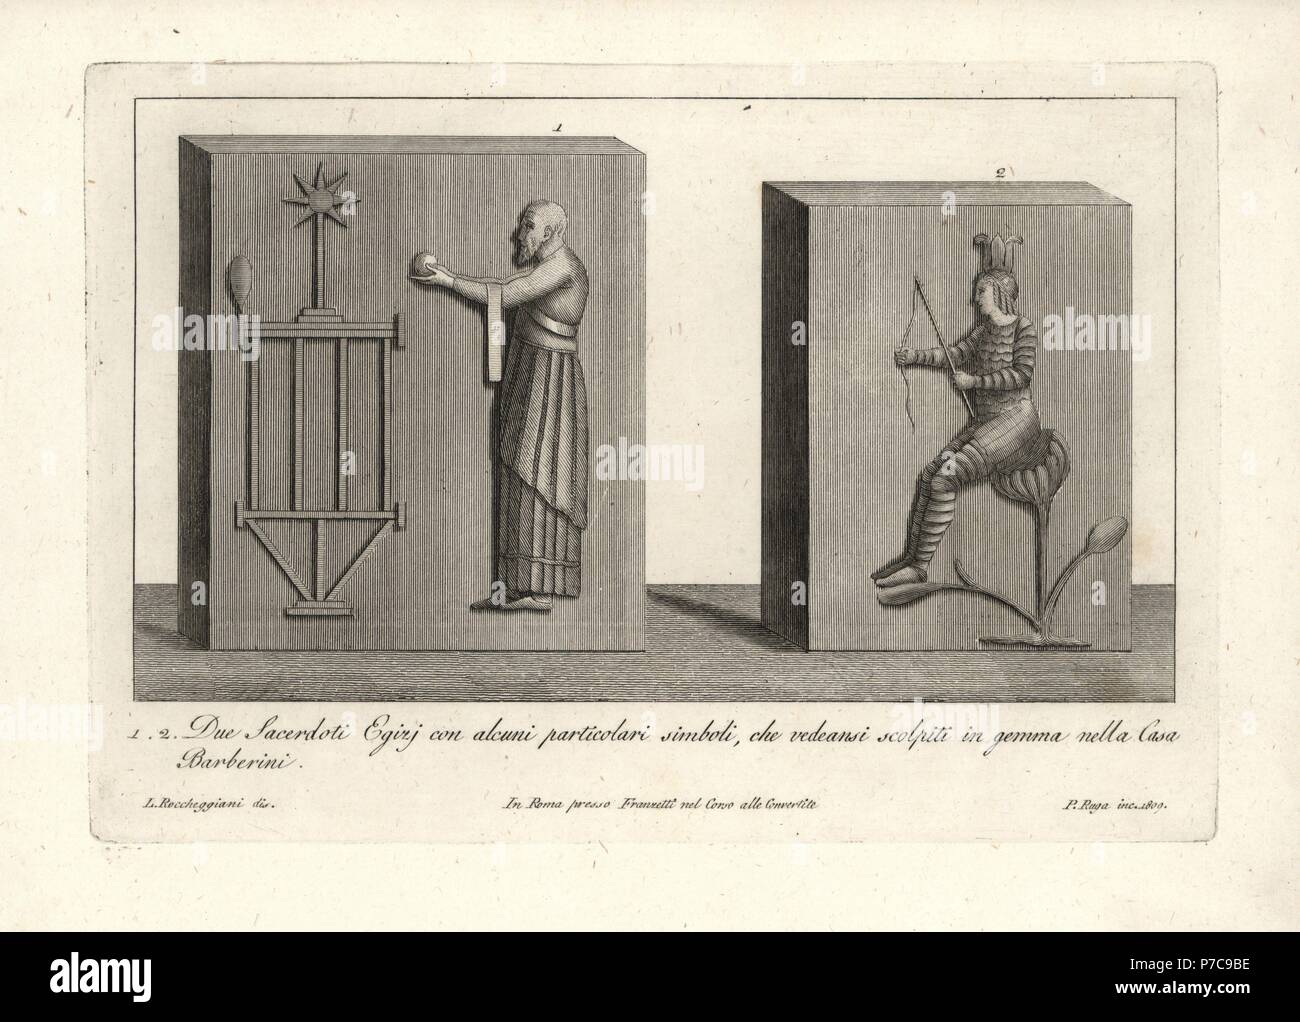 Two Egyptian priests with special symbols from carved gems in the Casa Barberini. Copperplate engraving by Pietro Ruga after an illustration by Lorenzo Rocceggiani from his own 100 Plates of Costumes Religious, Civil and Military of the Ancient Egyptians, Etruscans, Greeks and Romans, Franzetti, Rome, 1802. Stock Photo